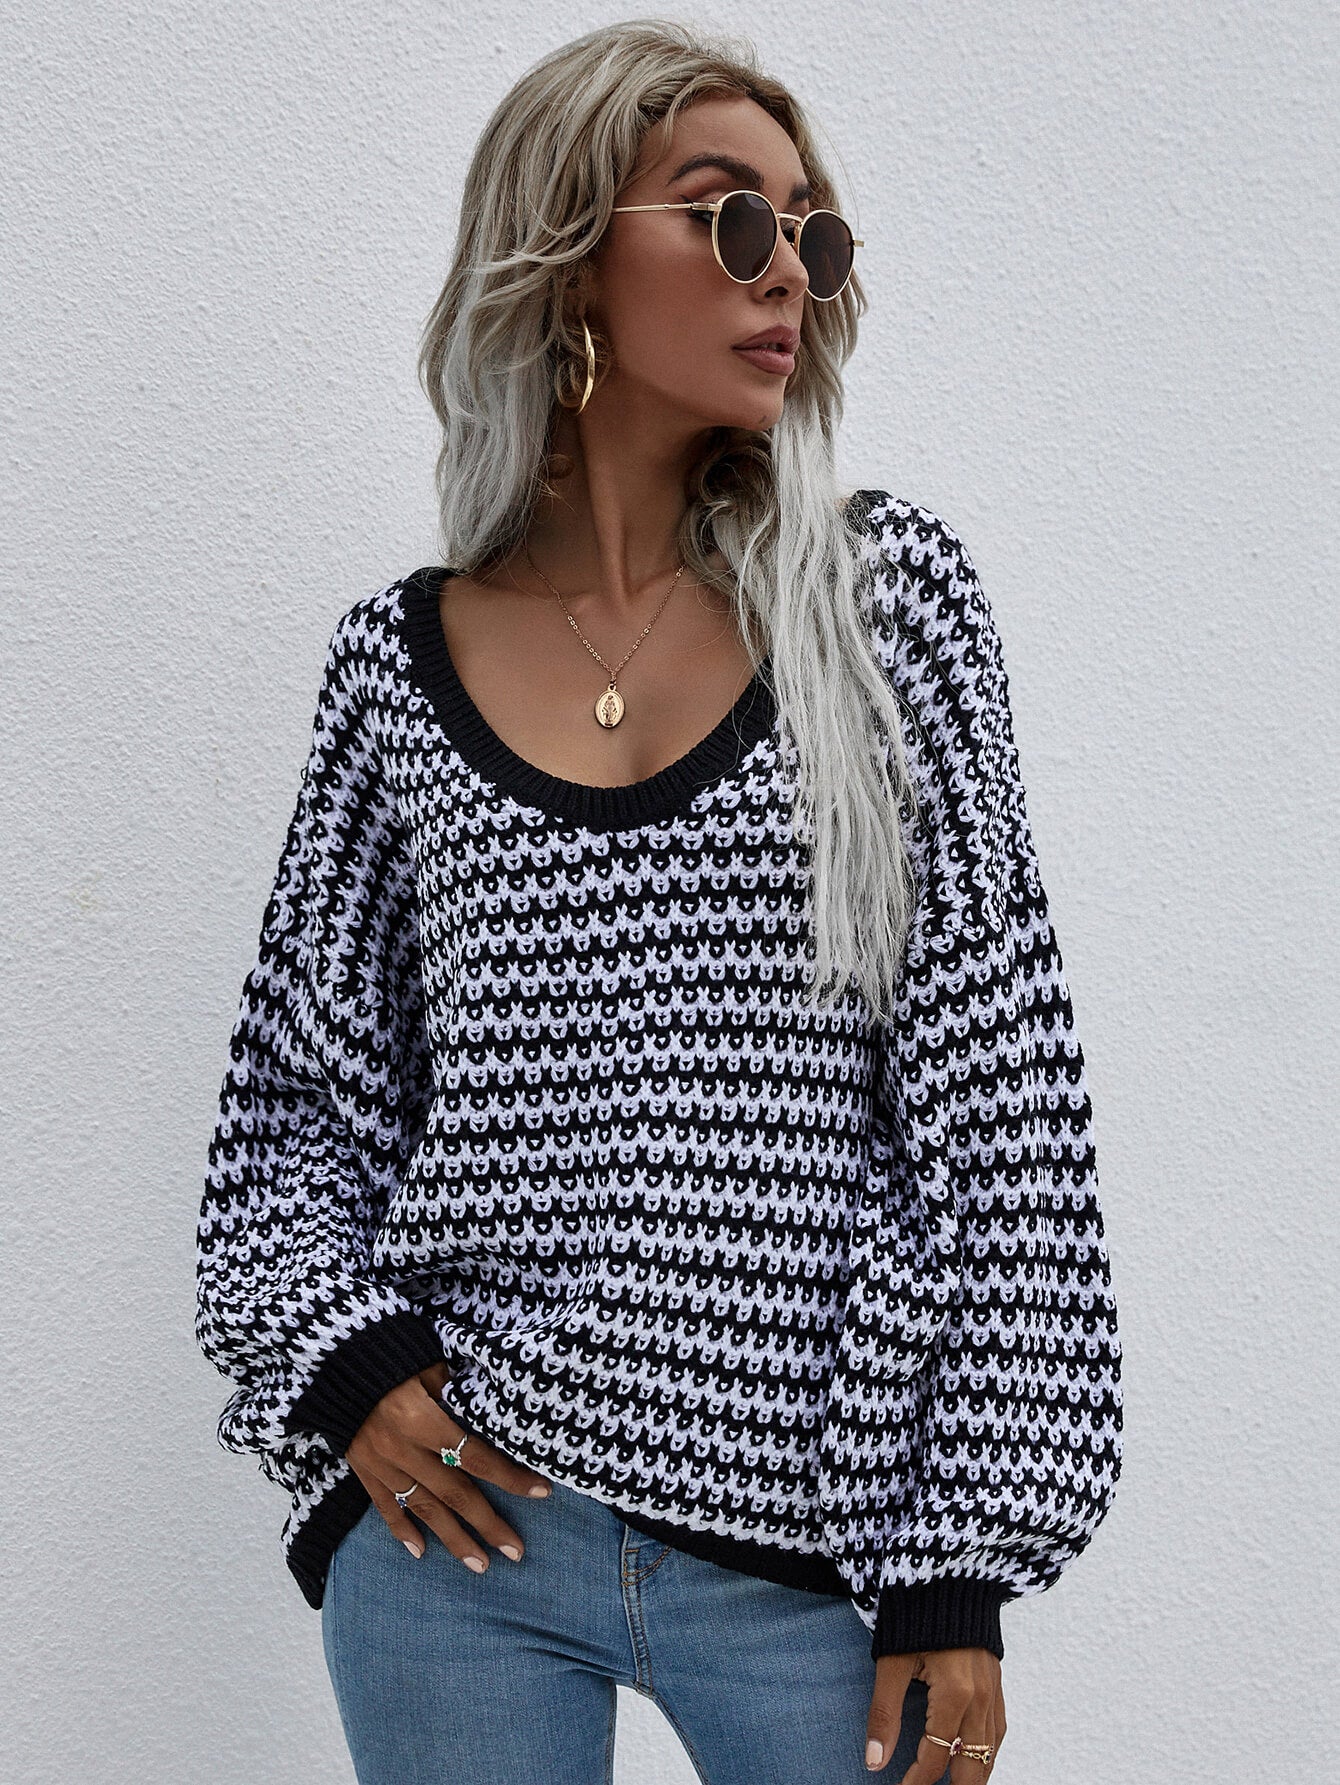 Striped Drop Shoulder V-Neck Pullover Sweater  | KIKI COUTURE-Women's Clothing, Designer Fashions, Shoes, Bags